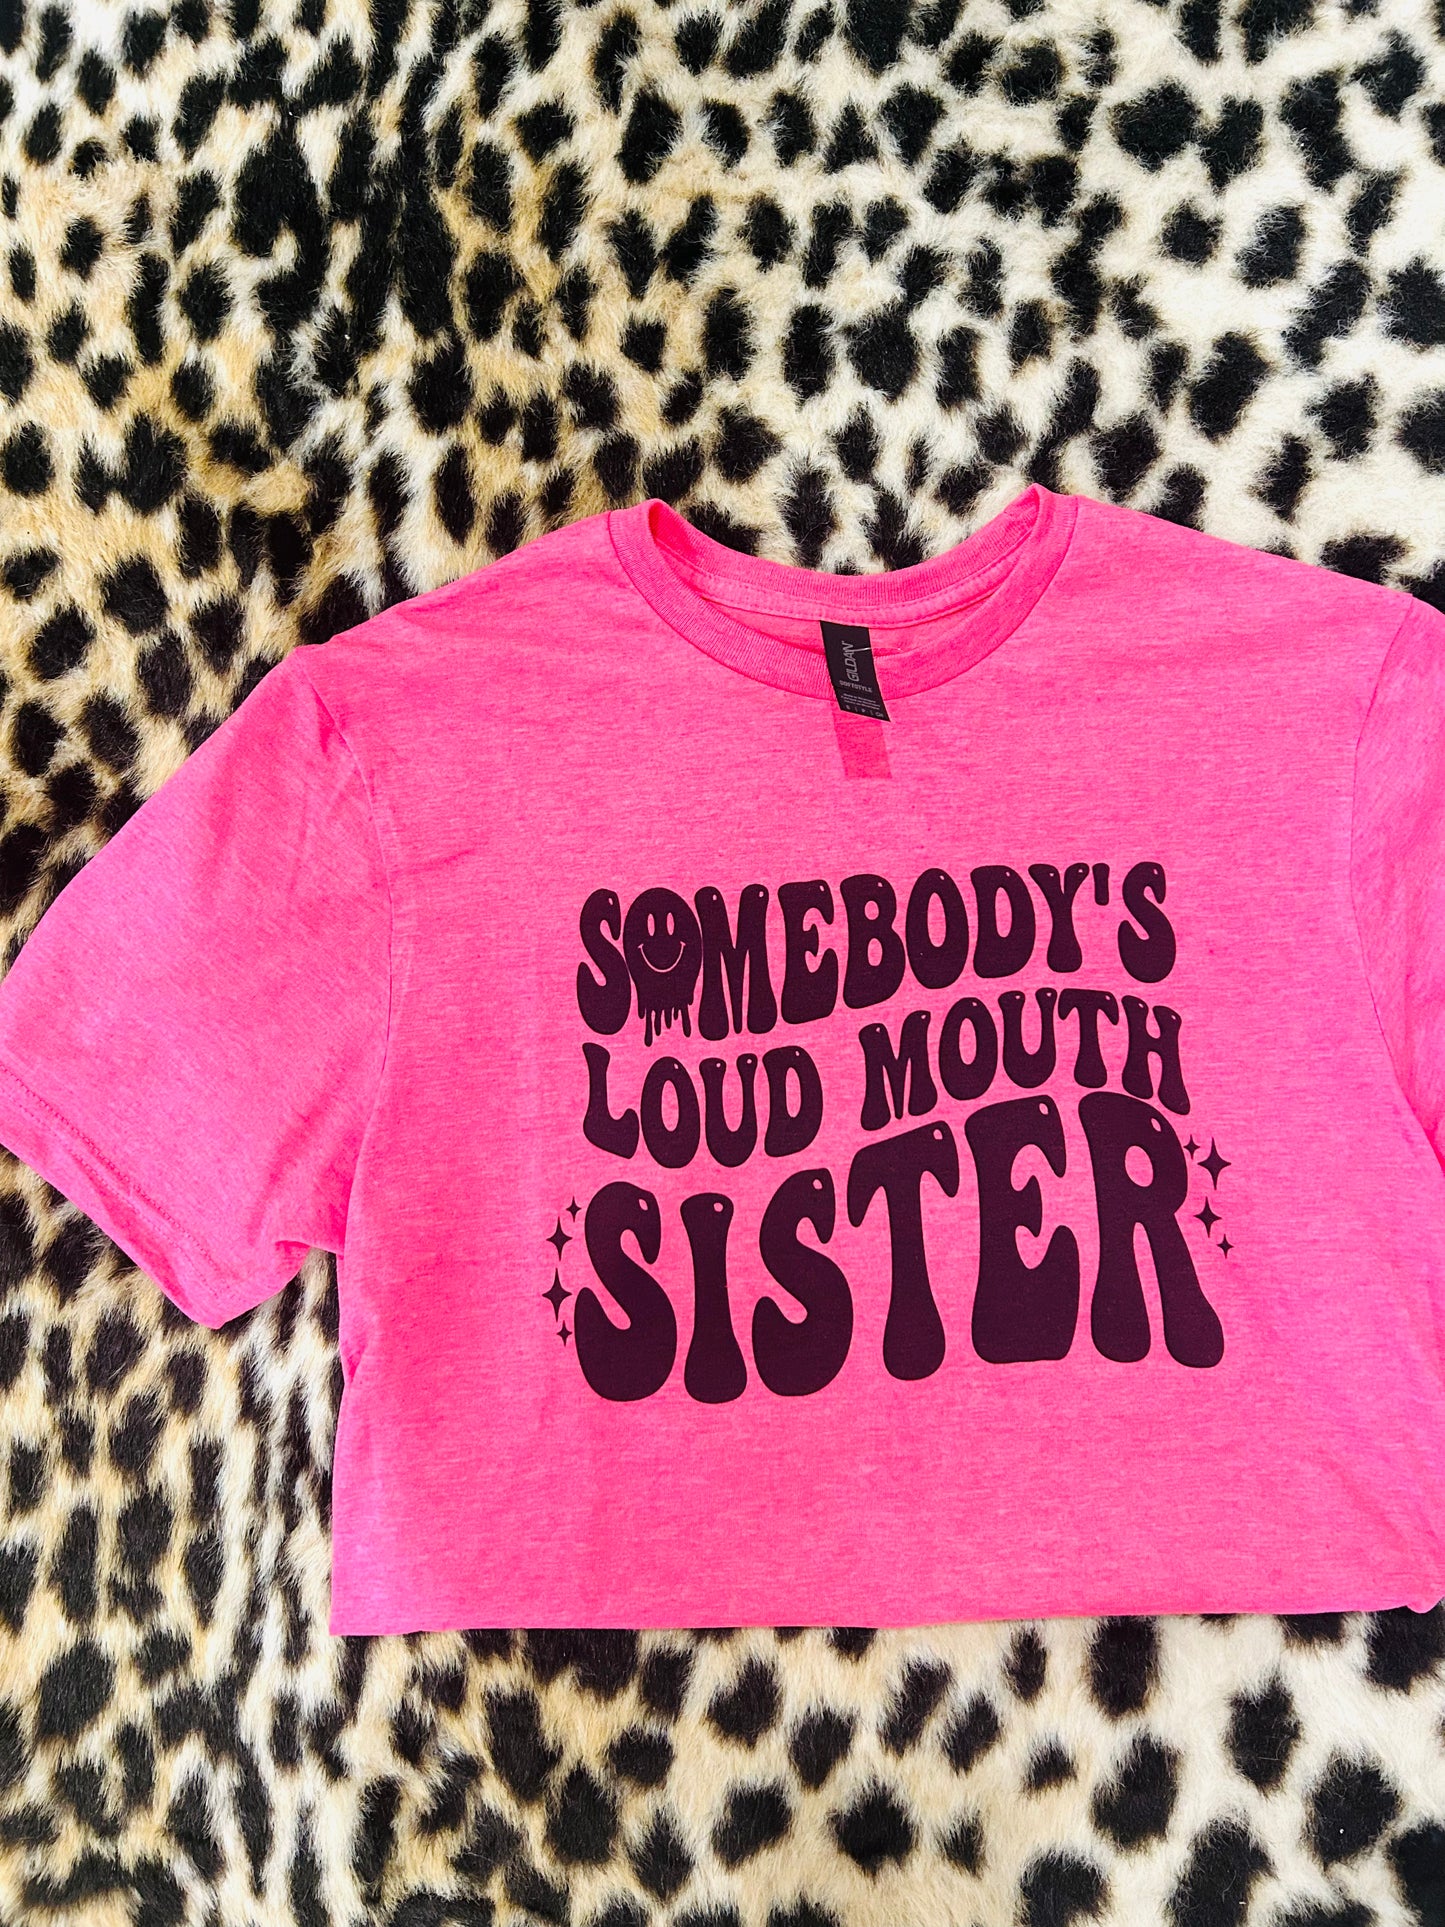 somebody’s loud mouth sister graphic tee